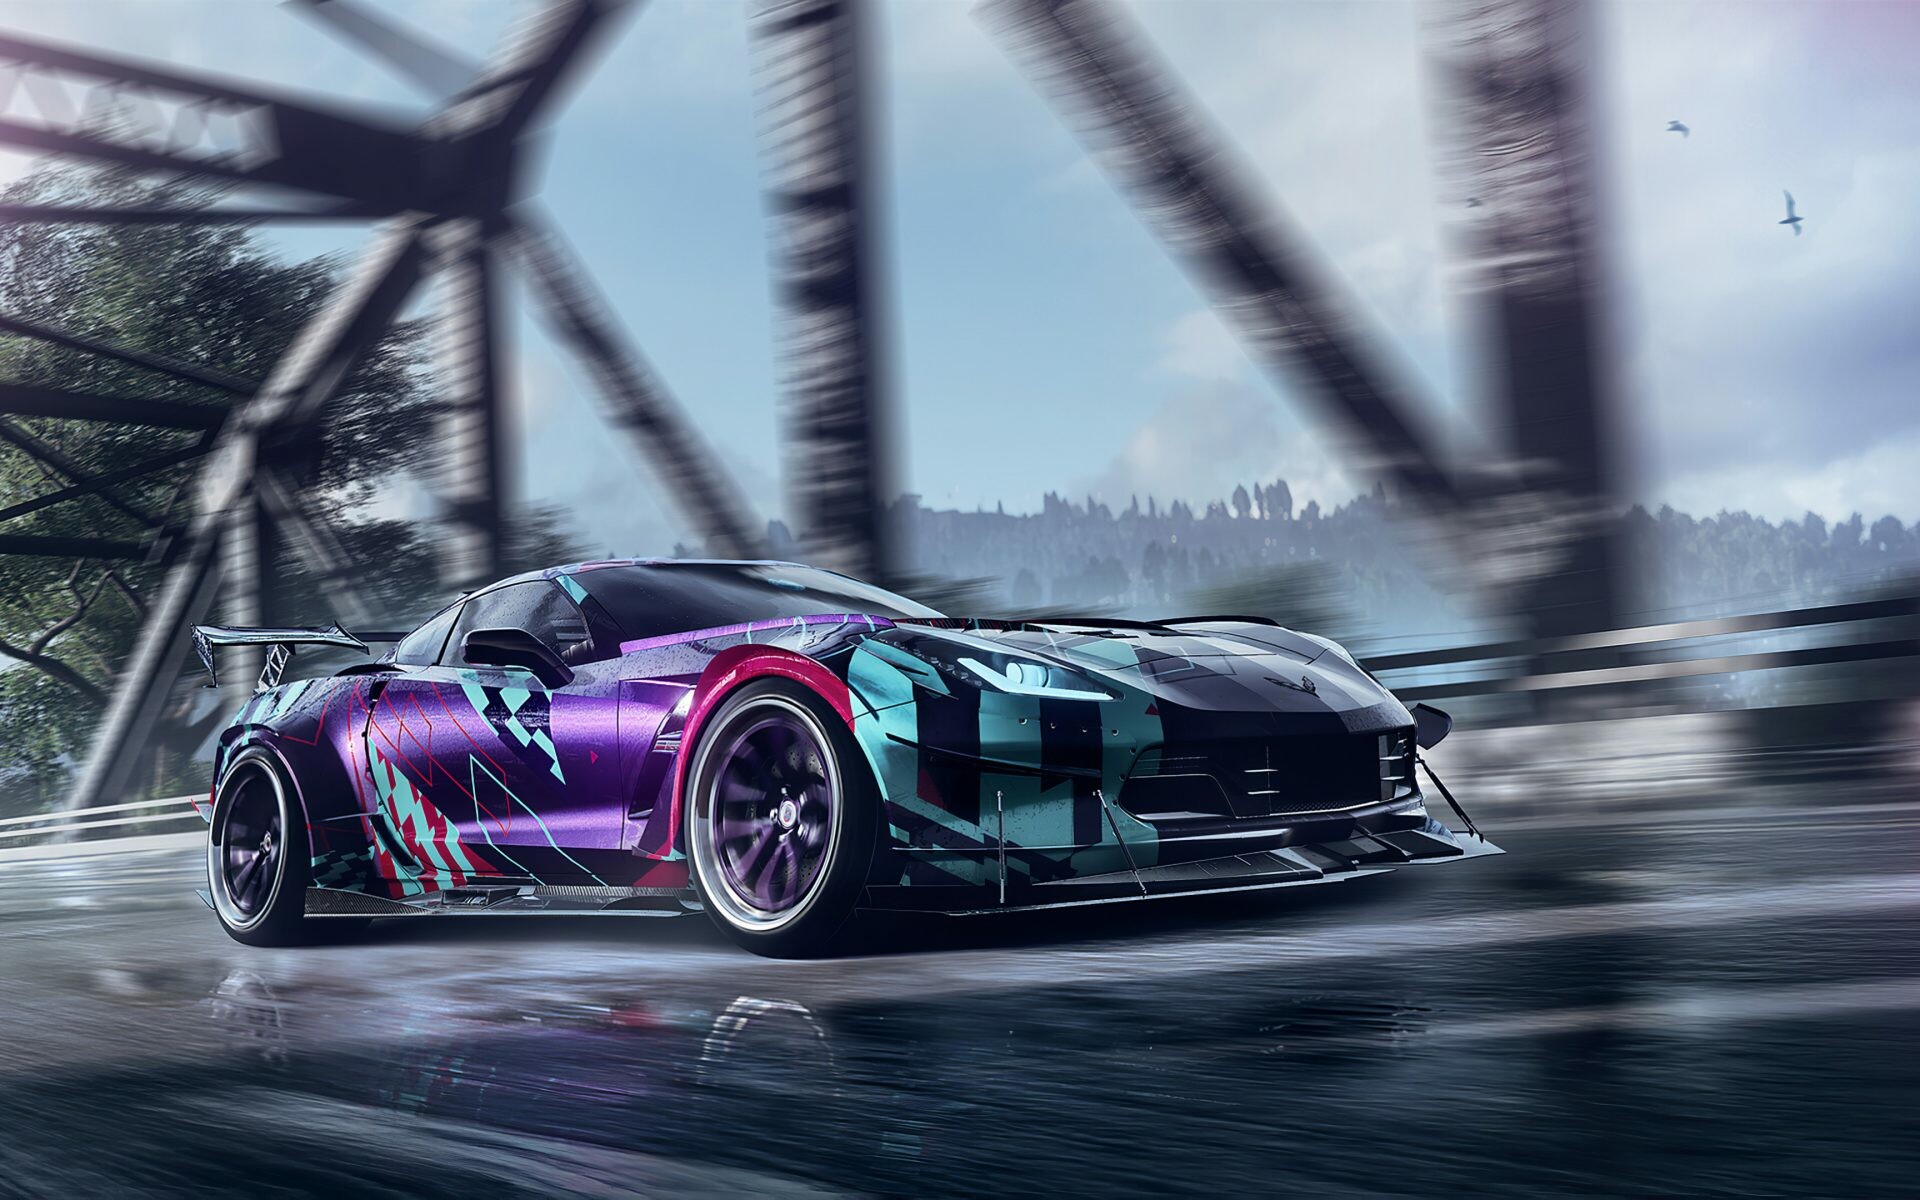 Need for Speed: Chevrolet Corvette c7, NFS Heat, a 2019 racing video game developed by Ghost Games. 1920x1200 HD Background.